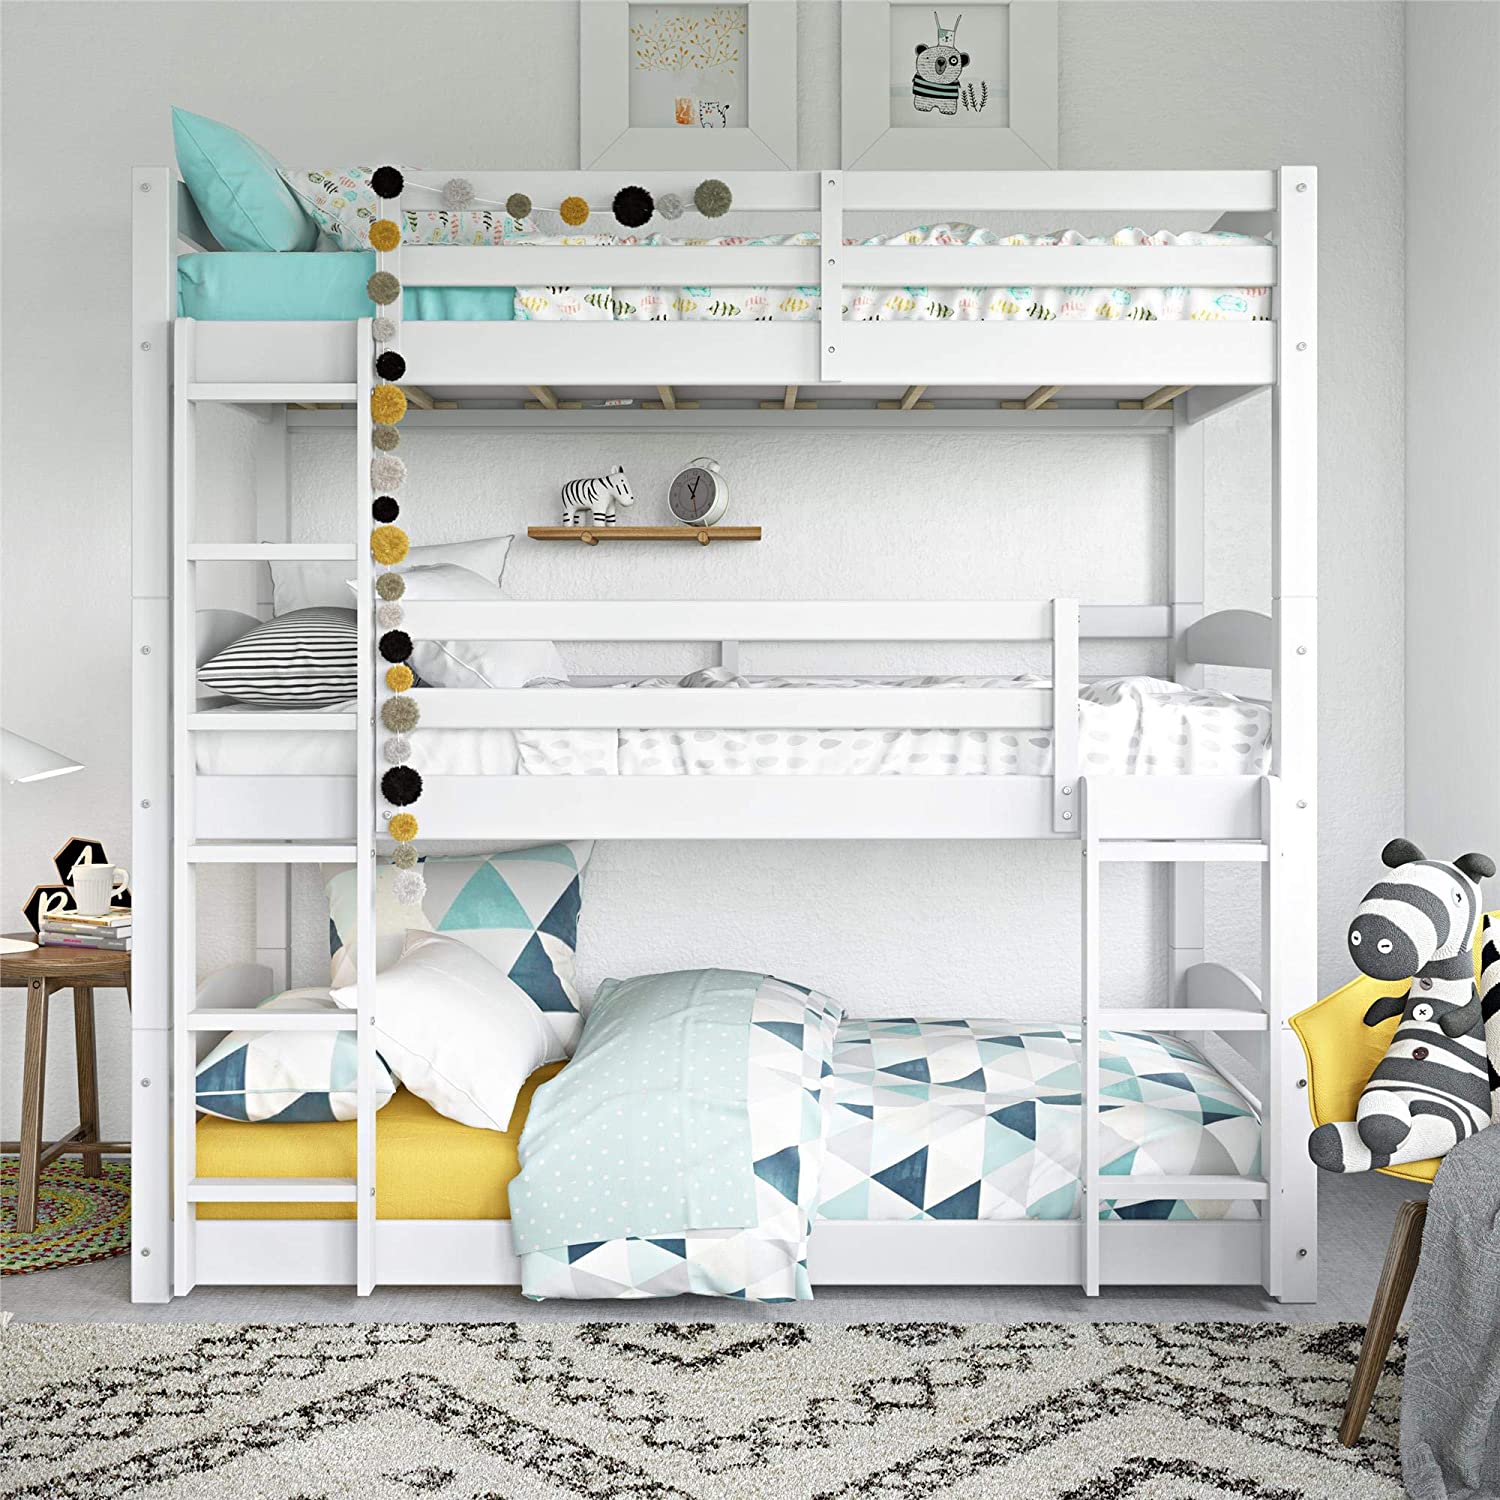 27 Bunk Beds That Make The Most Of Your Space